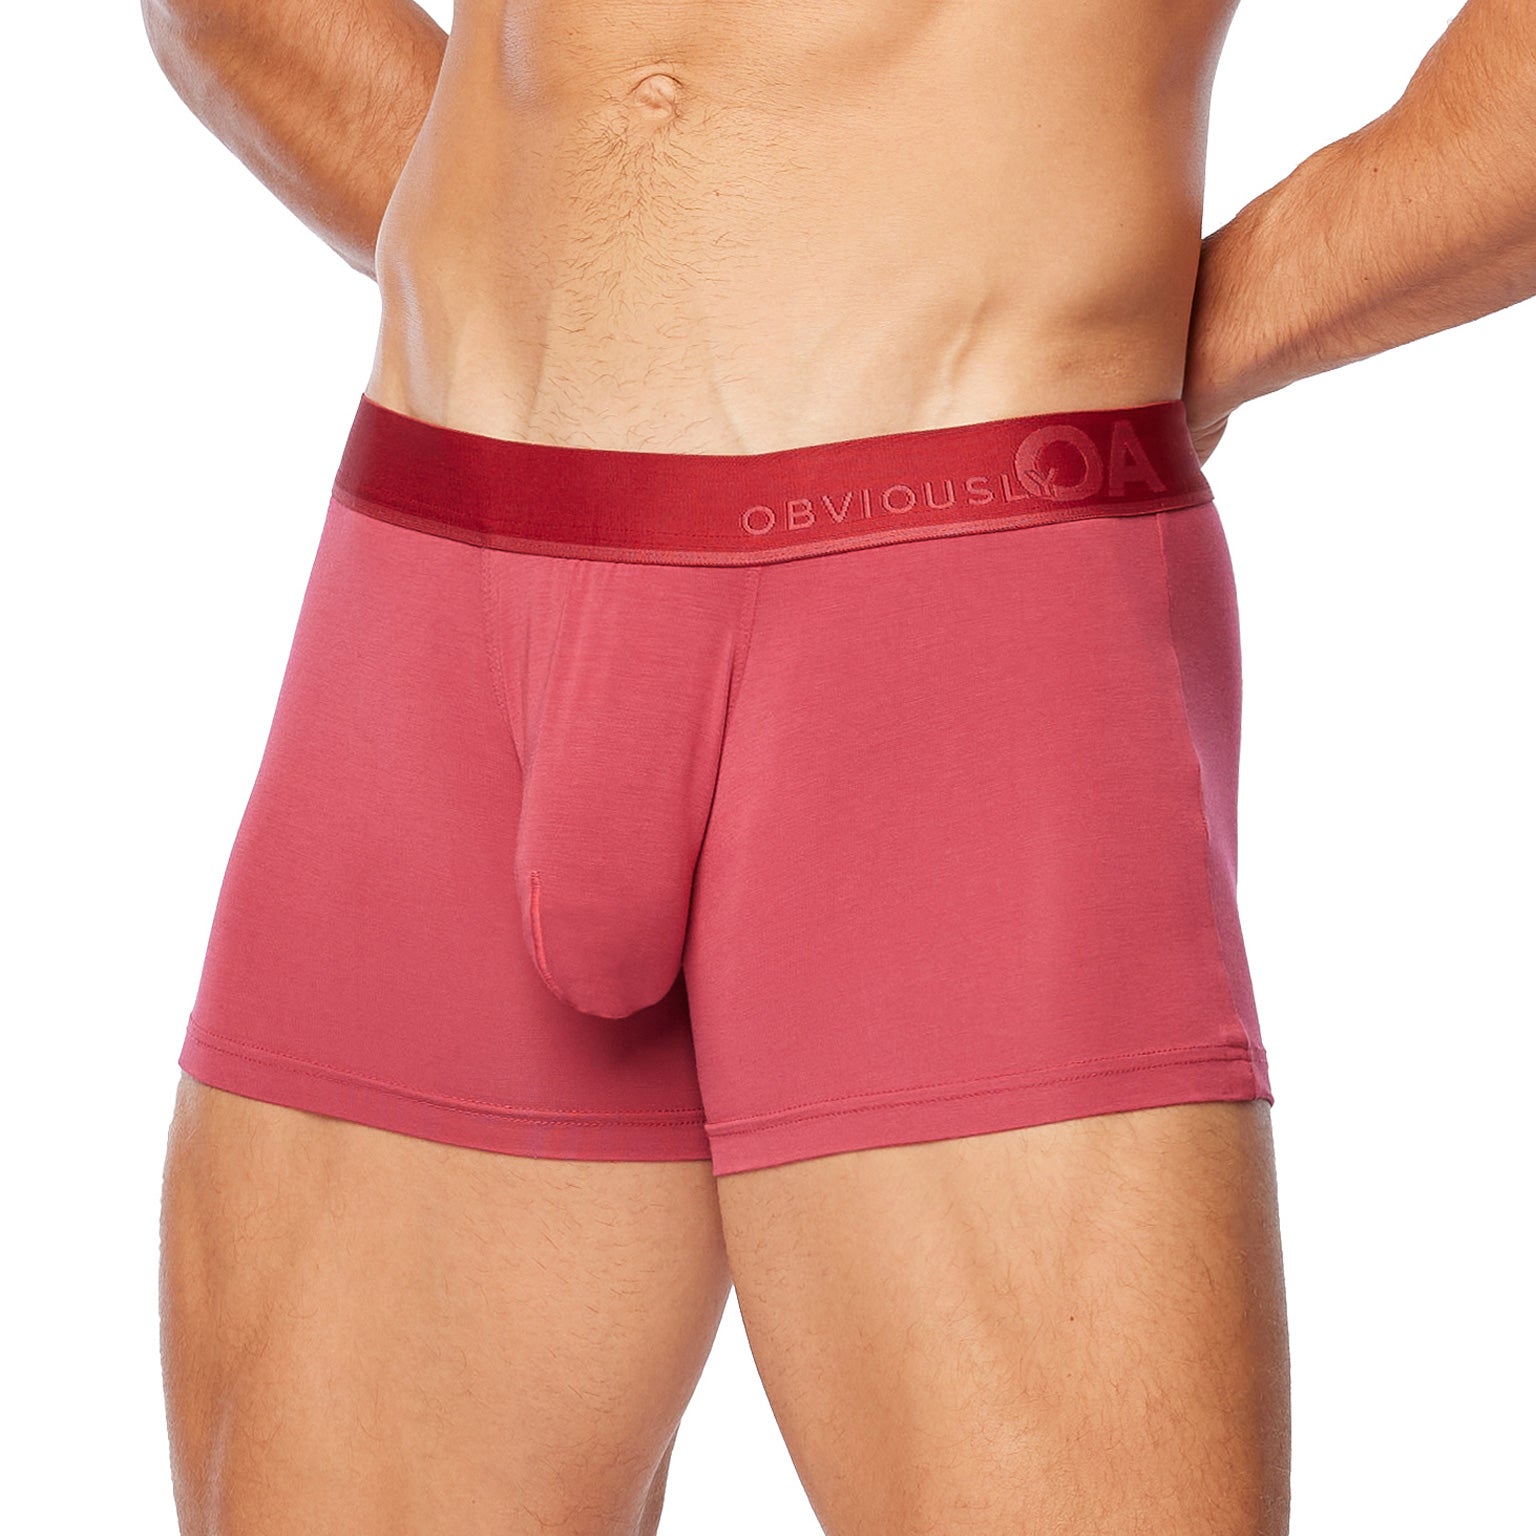 Obviously Apparel Basics Collection - AnatoMAX Boxer Brief 9 inch